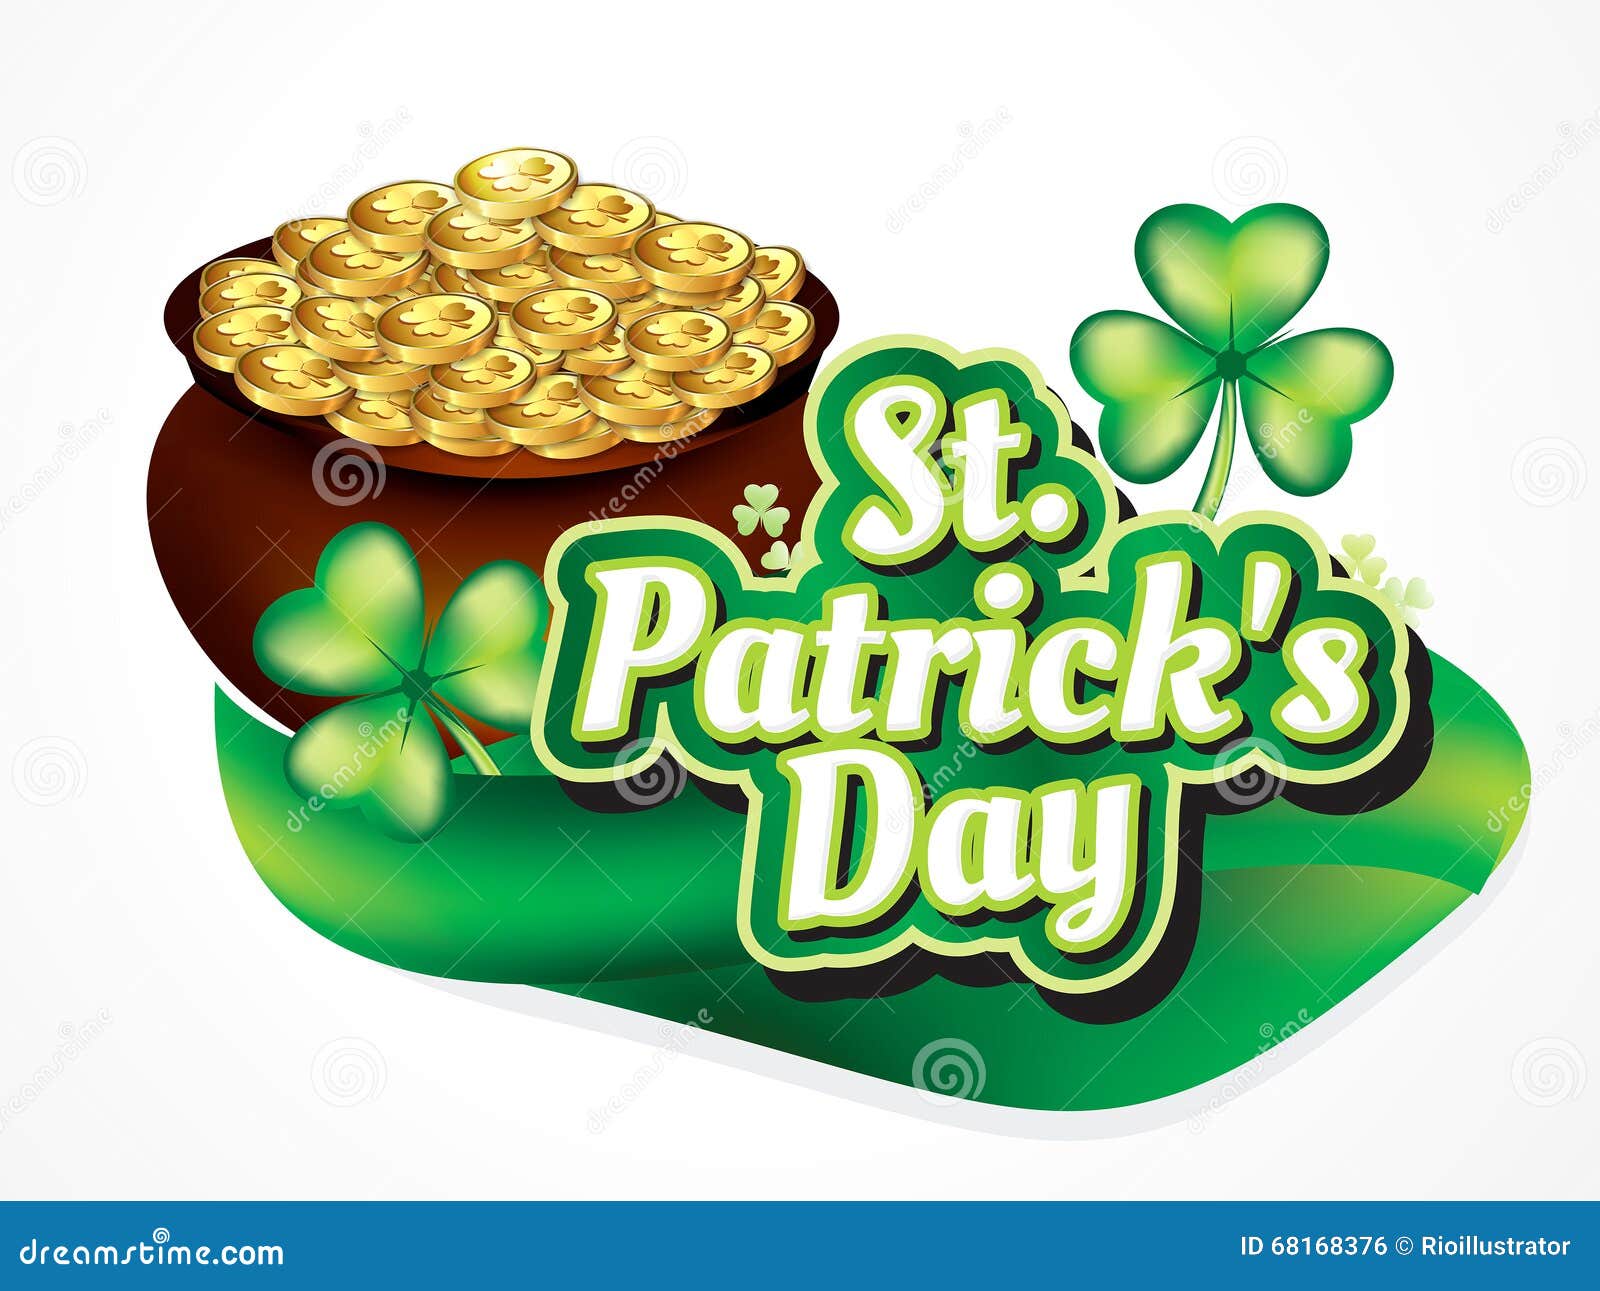 st par tick's day background with coin